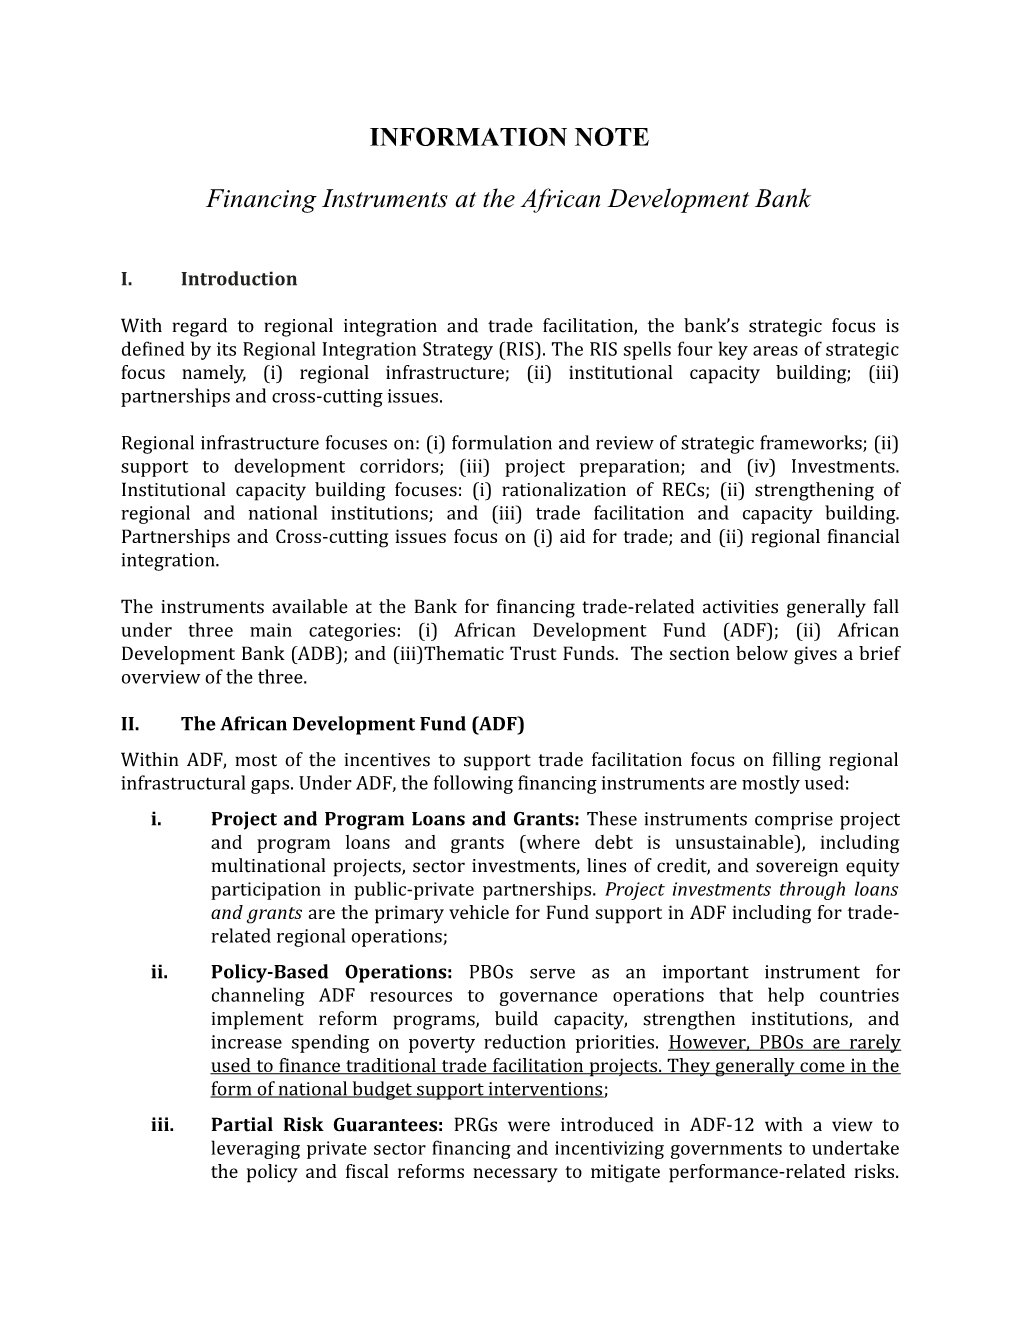 Financing Instruments at the African Development Bank